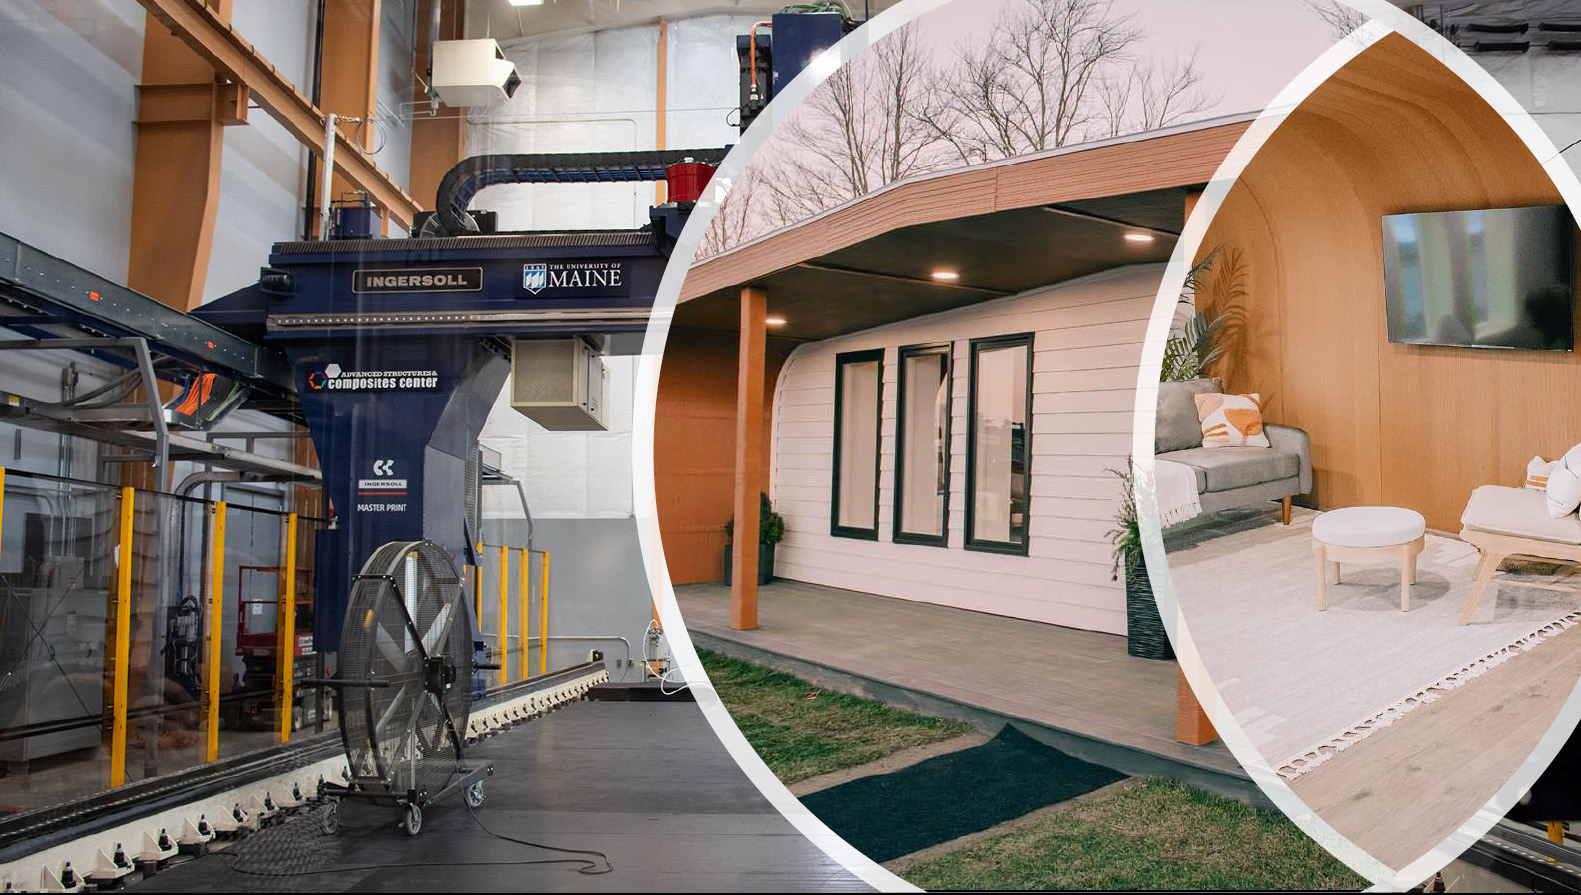 in 2019 the ASCC received no less than three Guinness World Records, one of which was for the world’s largest prototype polymer 3D printer It has recently introduced BioHome3D – the first 3D-printed house made entirely with bio-based materials. © University of Maine